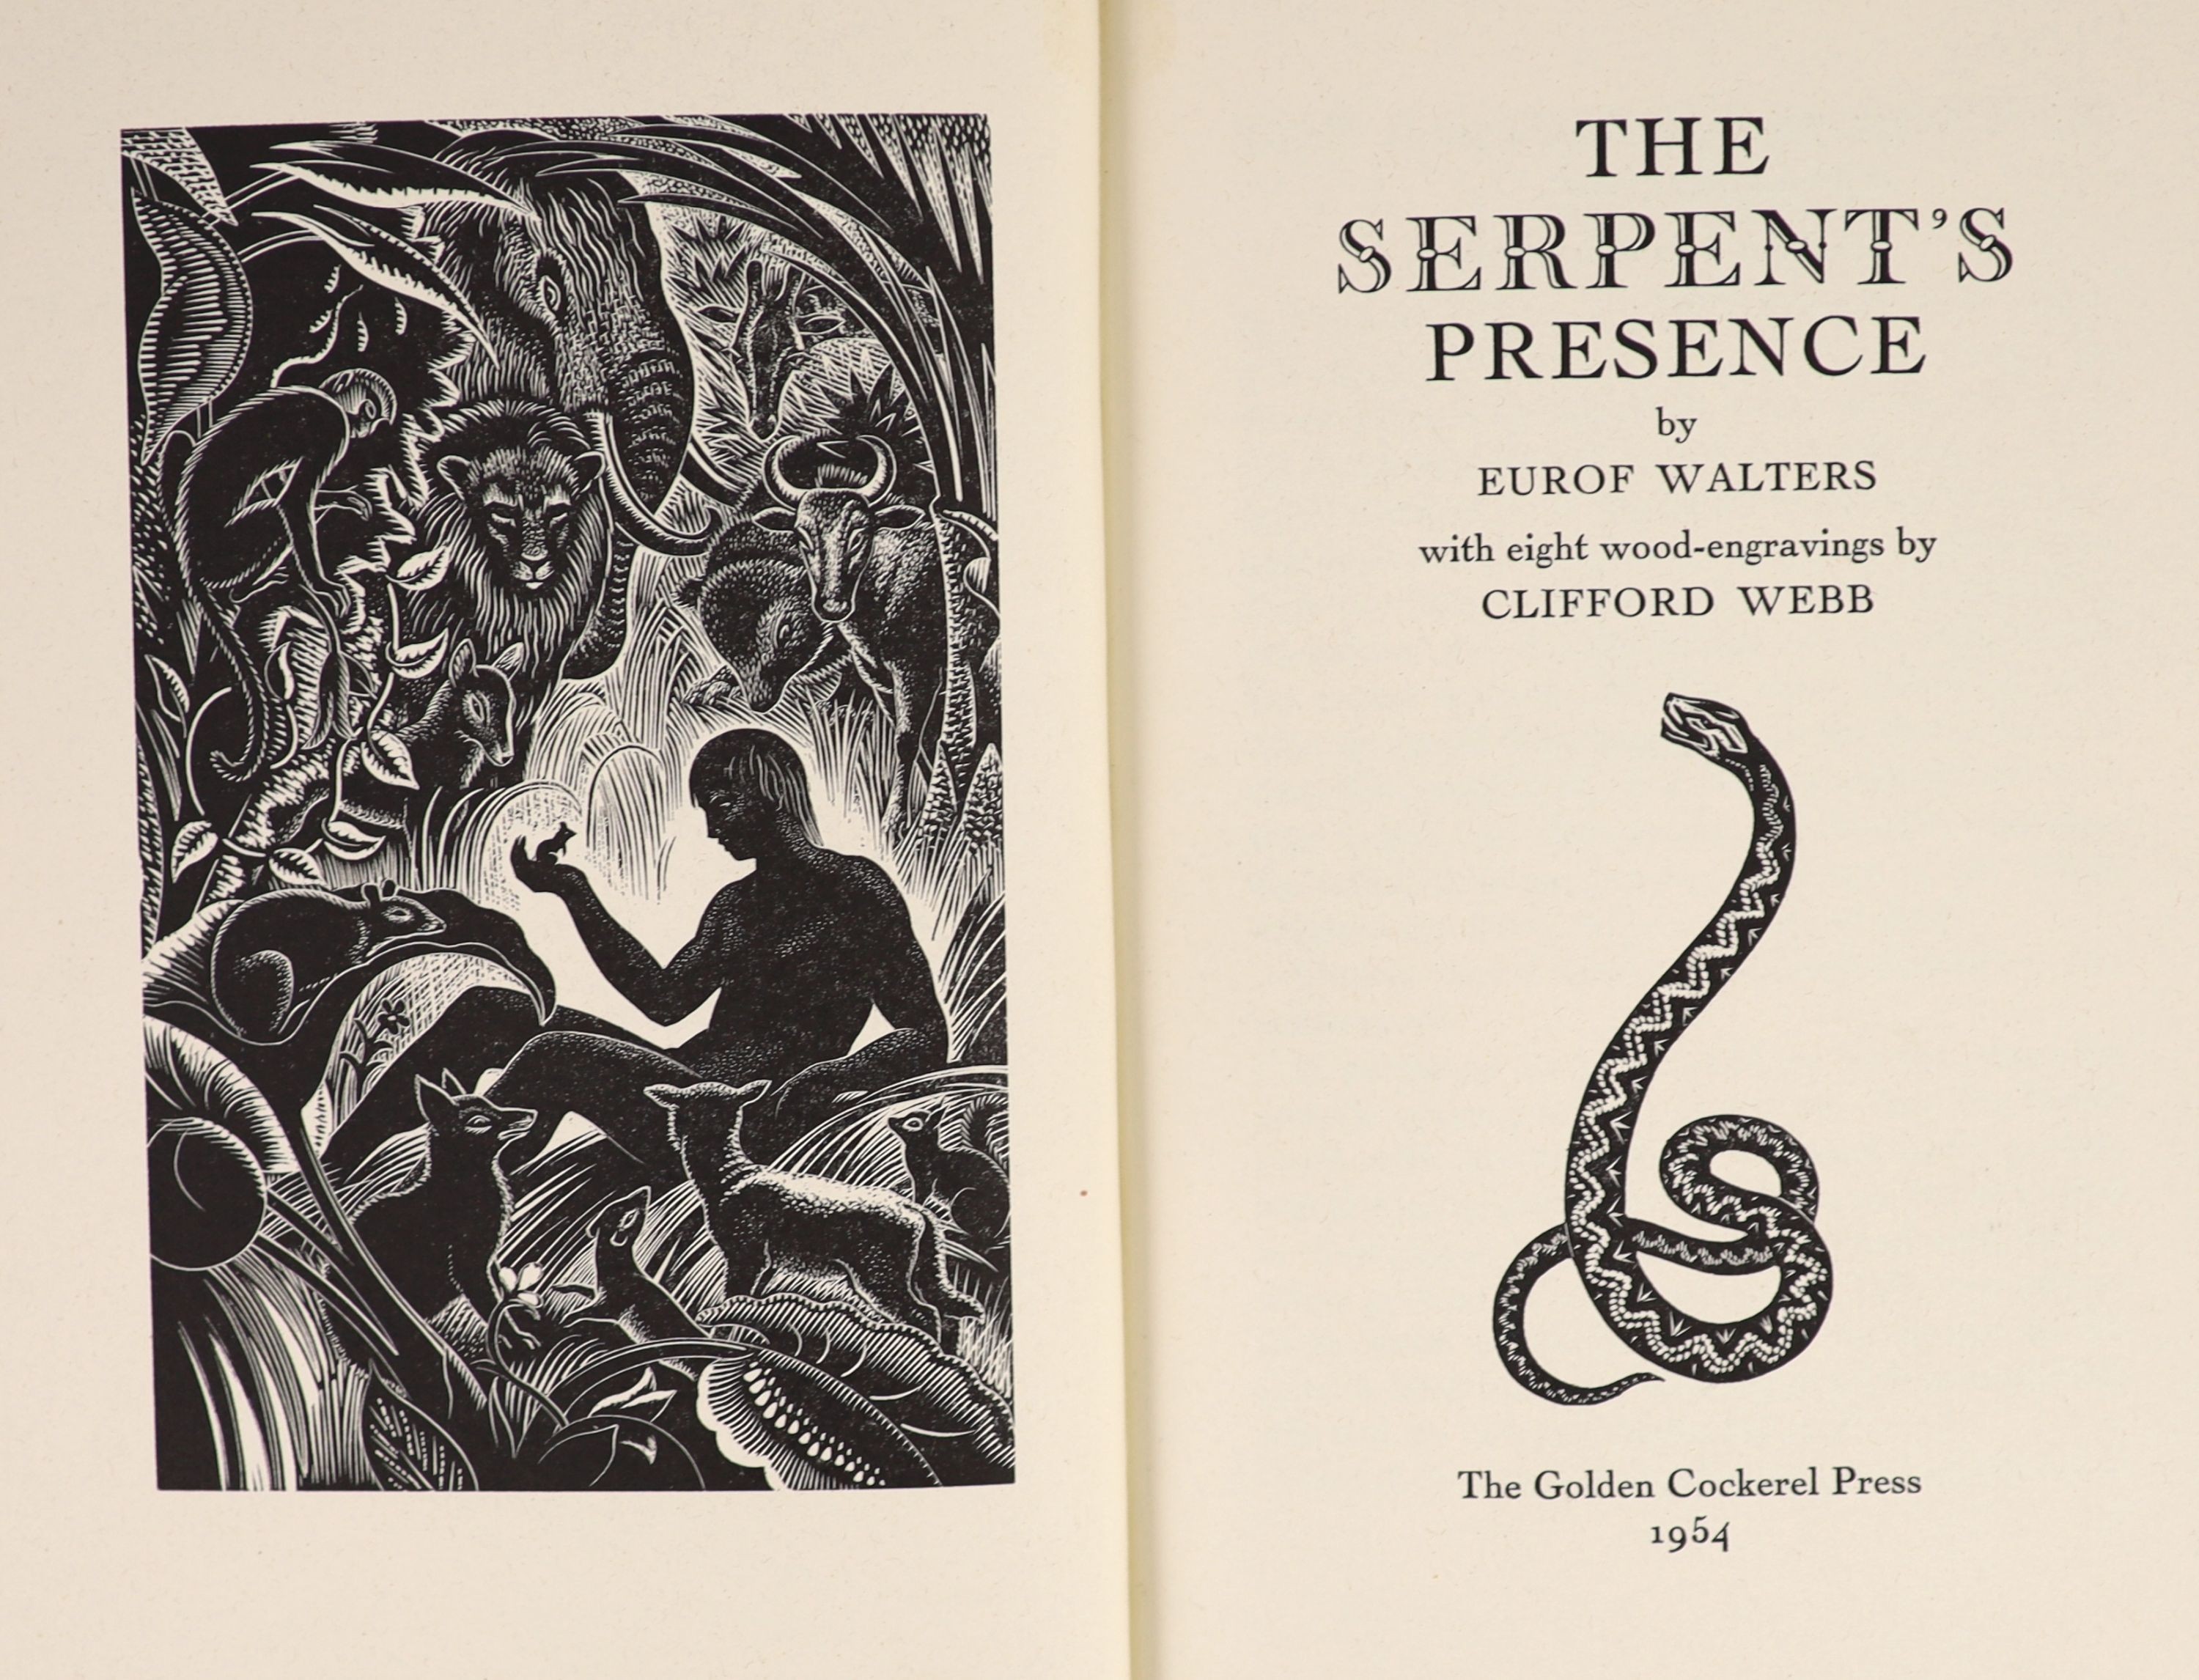 Golden Cockerel Press - Waltham Saint Lawrence, Berkshire - Swinburne, Algernon Charles - Pasiphae, one of 400, with 6 engravings by John Buckland Wright, 1950 and Walters, Eurof - The Serpent’s Presence, one of 290, wit